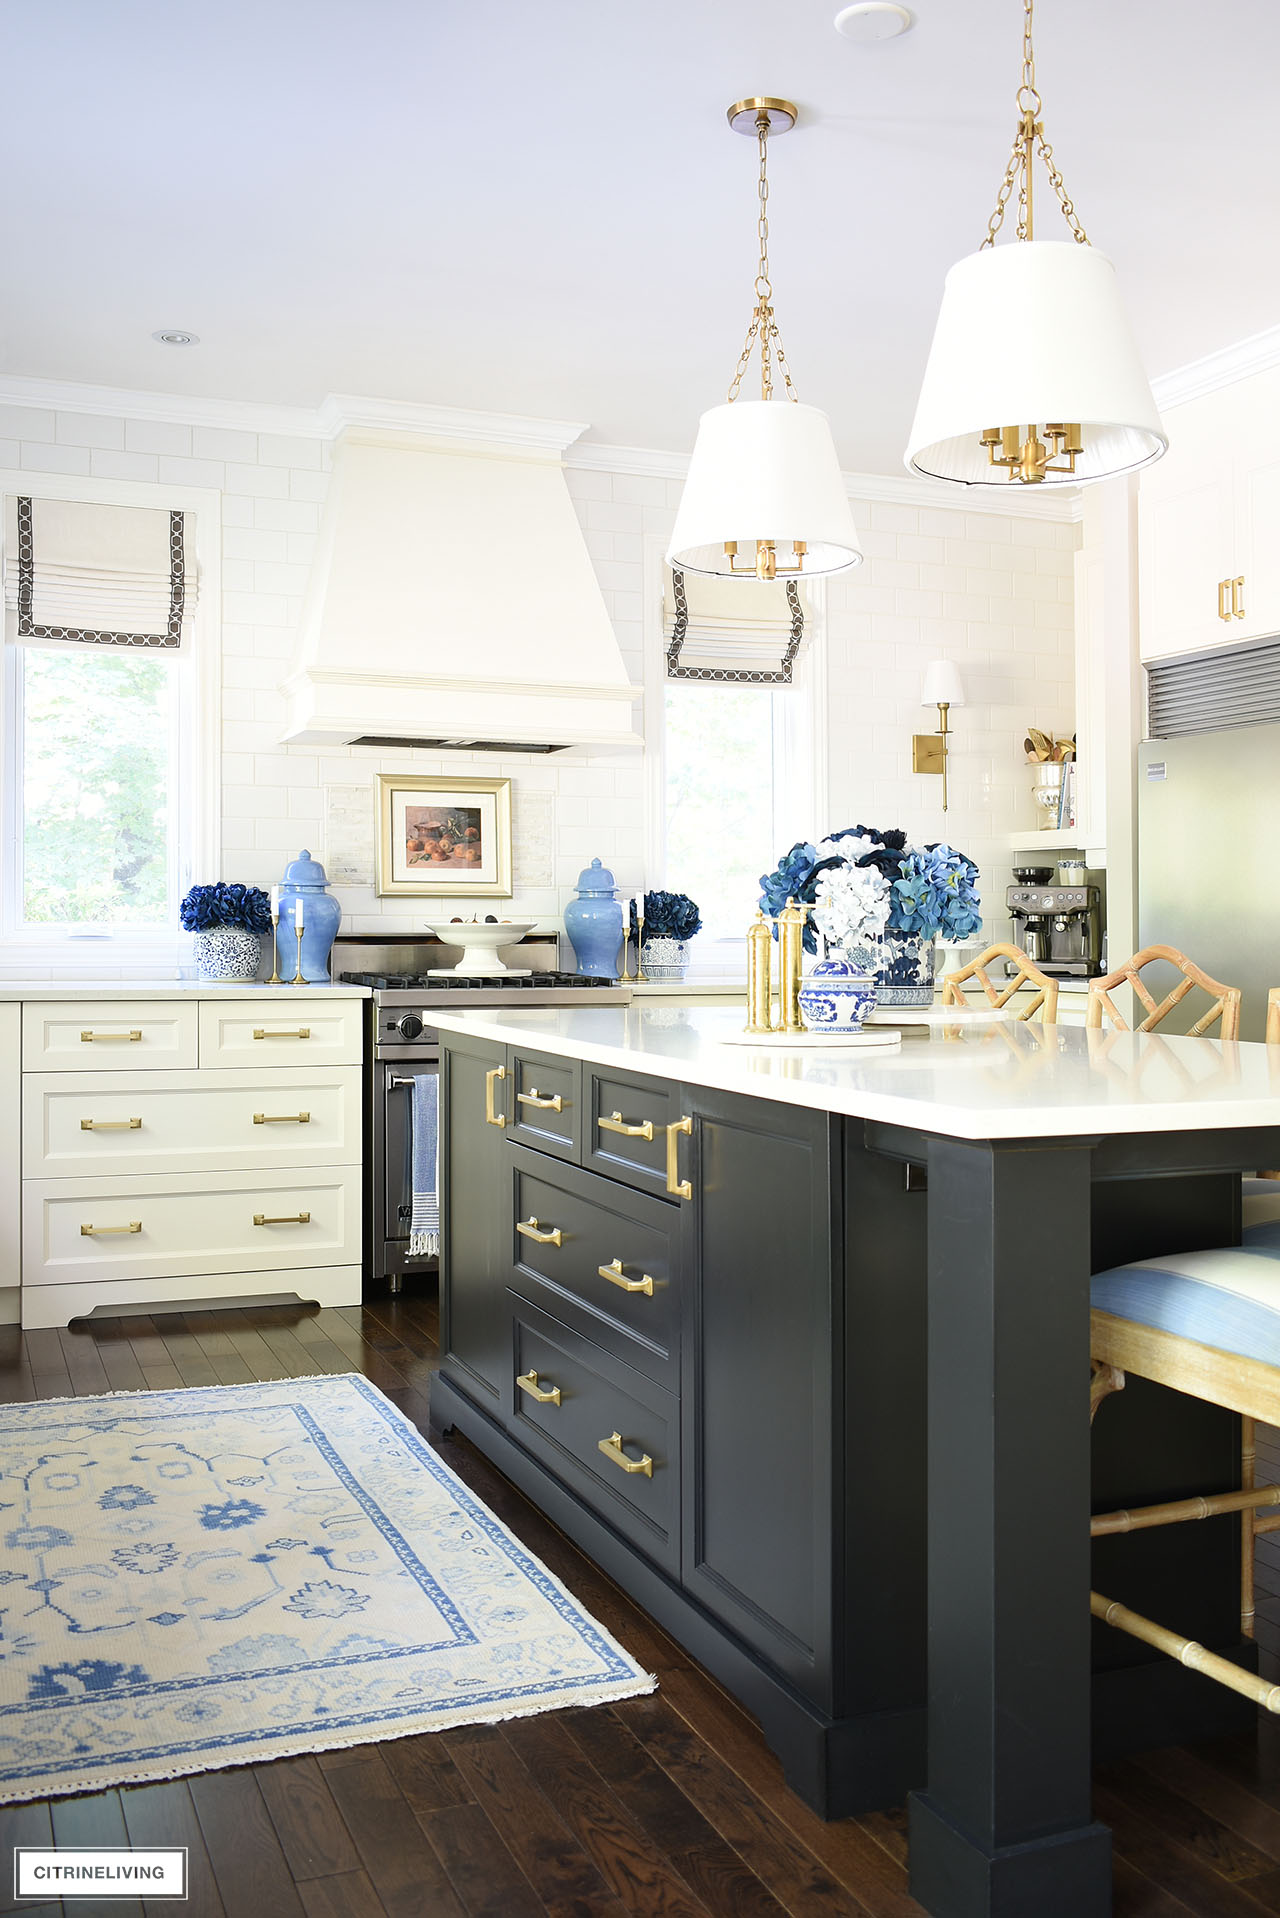 Kitchen decorated for fall with layers of blues, gold, vintage art, oushak rug and natural elements.